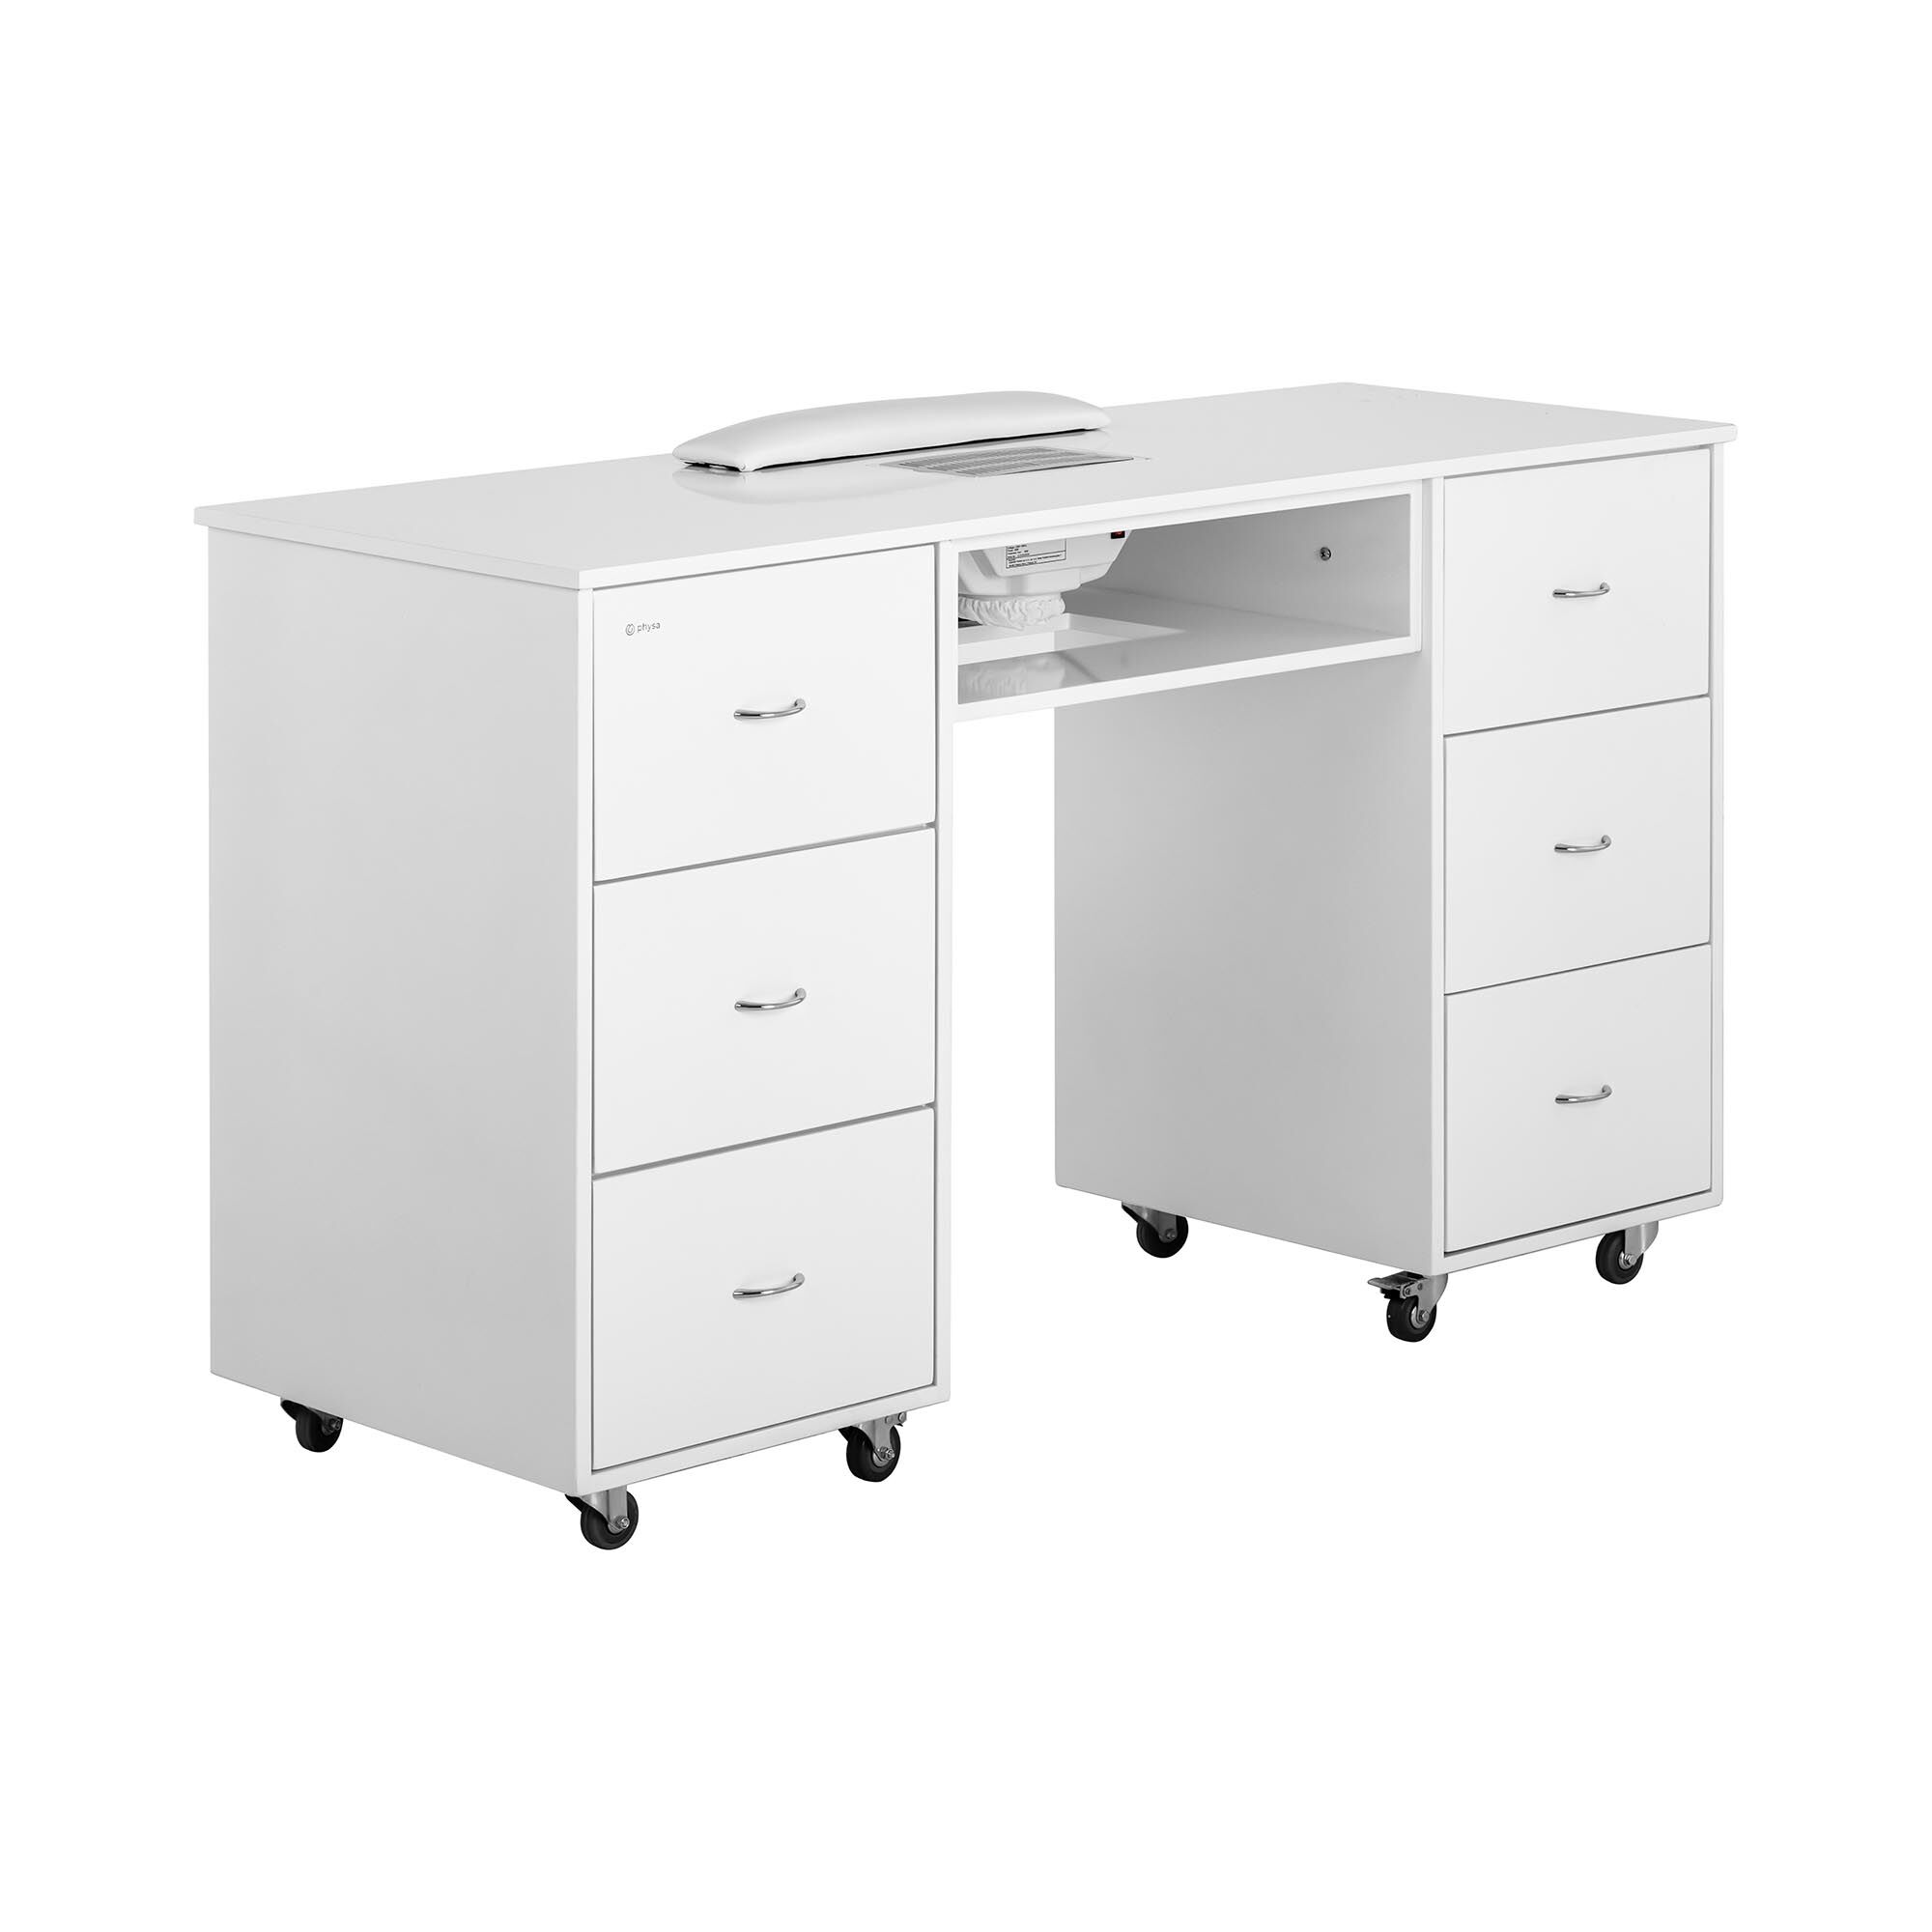 physa Manicure Station - dust collector - 6 drawers - wheels - MDF